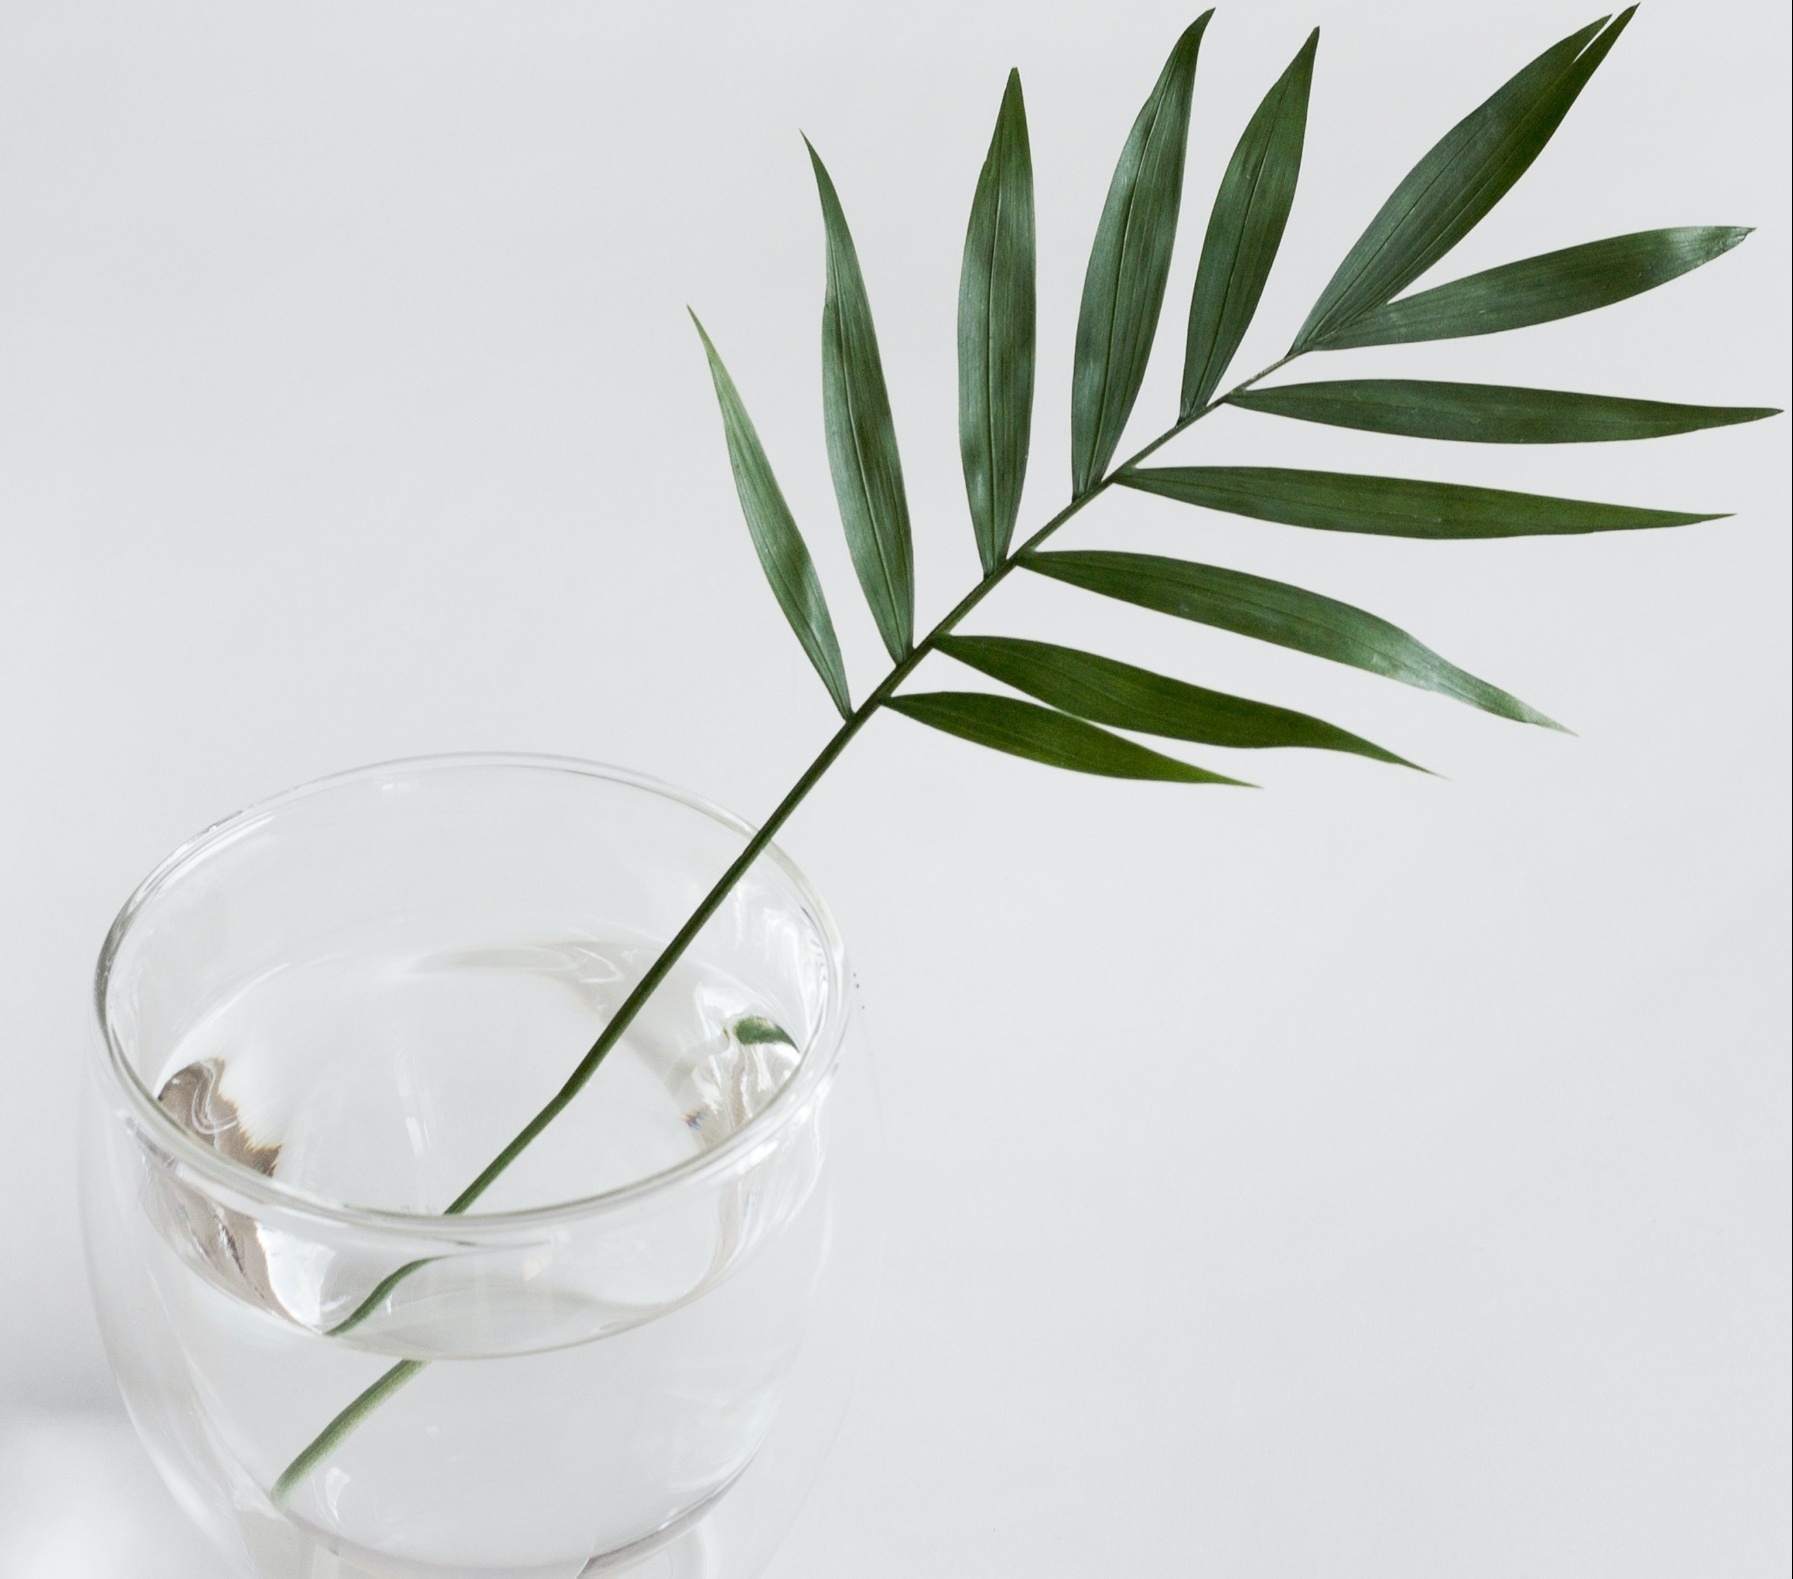 Image of a palm leaf in front of a white background. Been wondering about teletherapy in Florida 32819? Our online therapists can help you decide if it is the right choice. Get treatment from you home with online therapy in Florida 32205. Contact us to get started. 